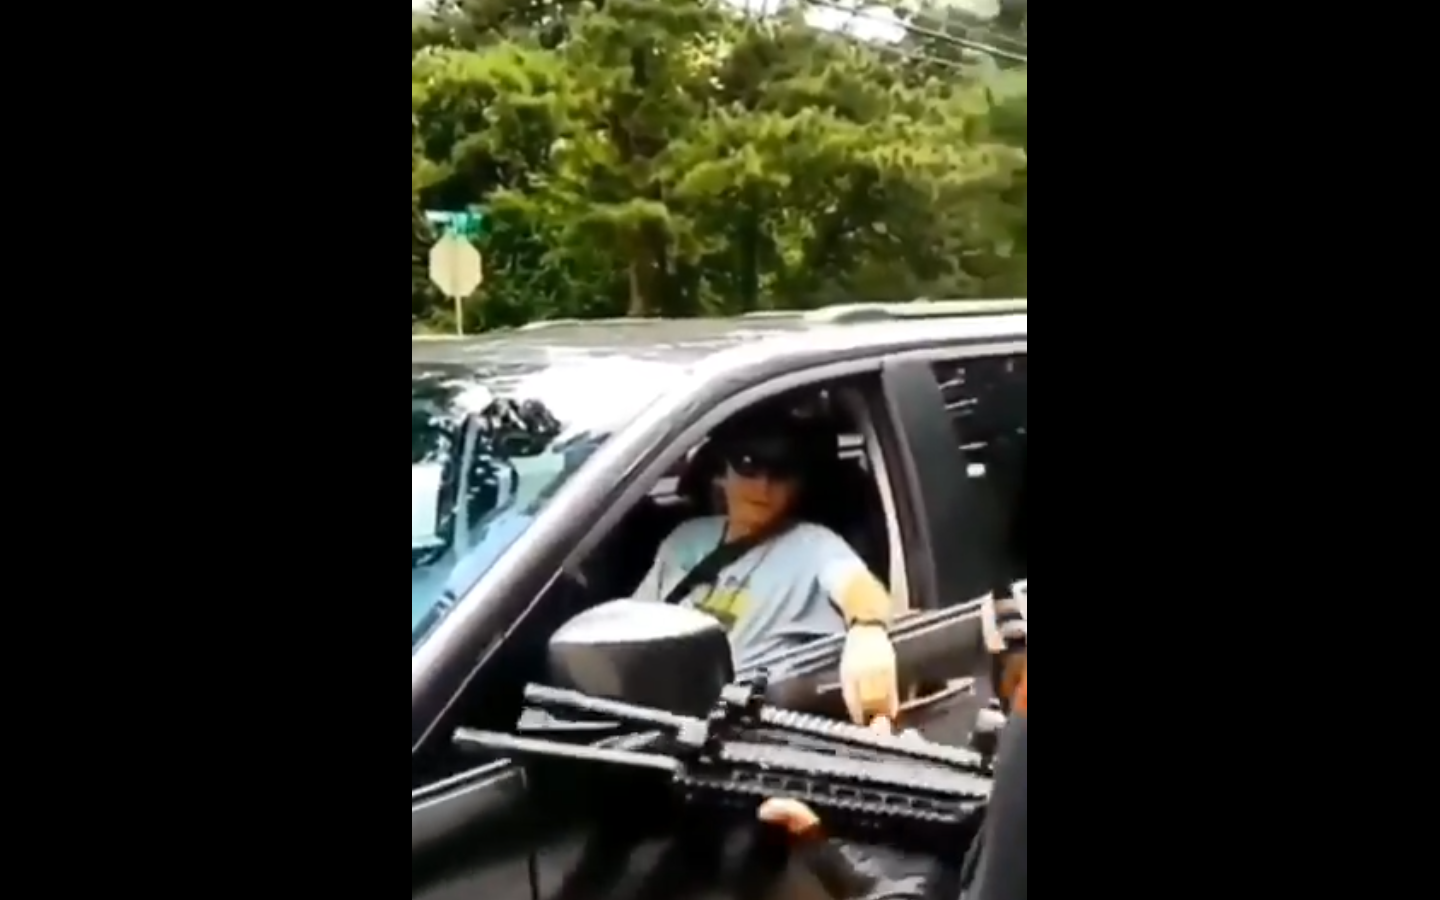 Armed Black Militias Pull Over White Families At Stone Mountain, GA And Demand 'Reparations'